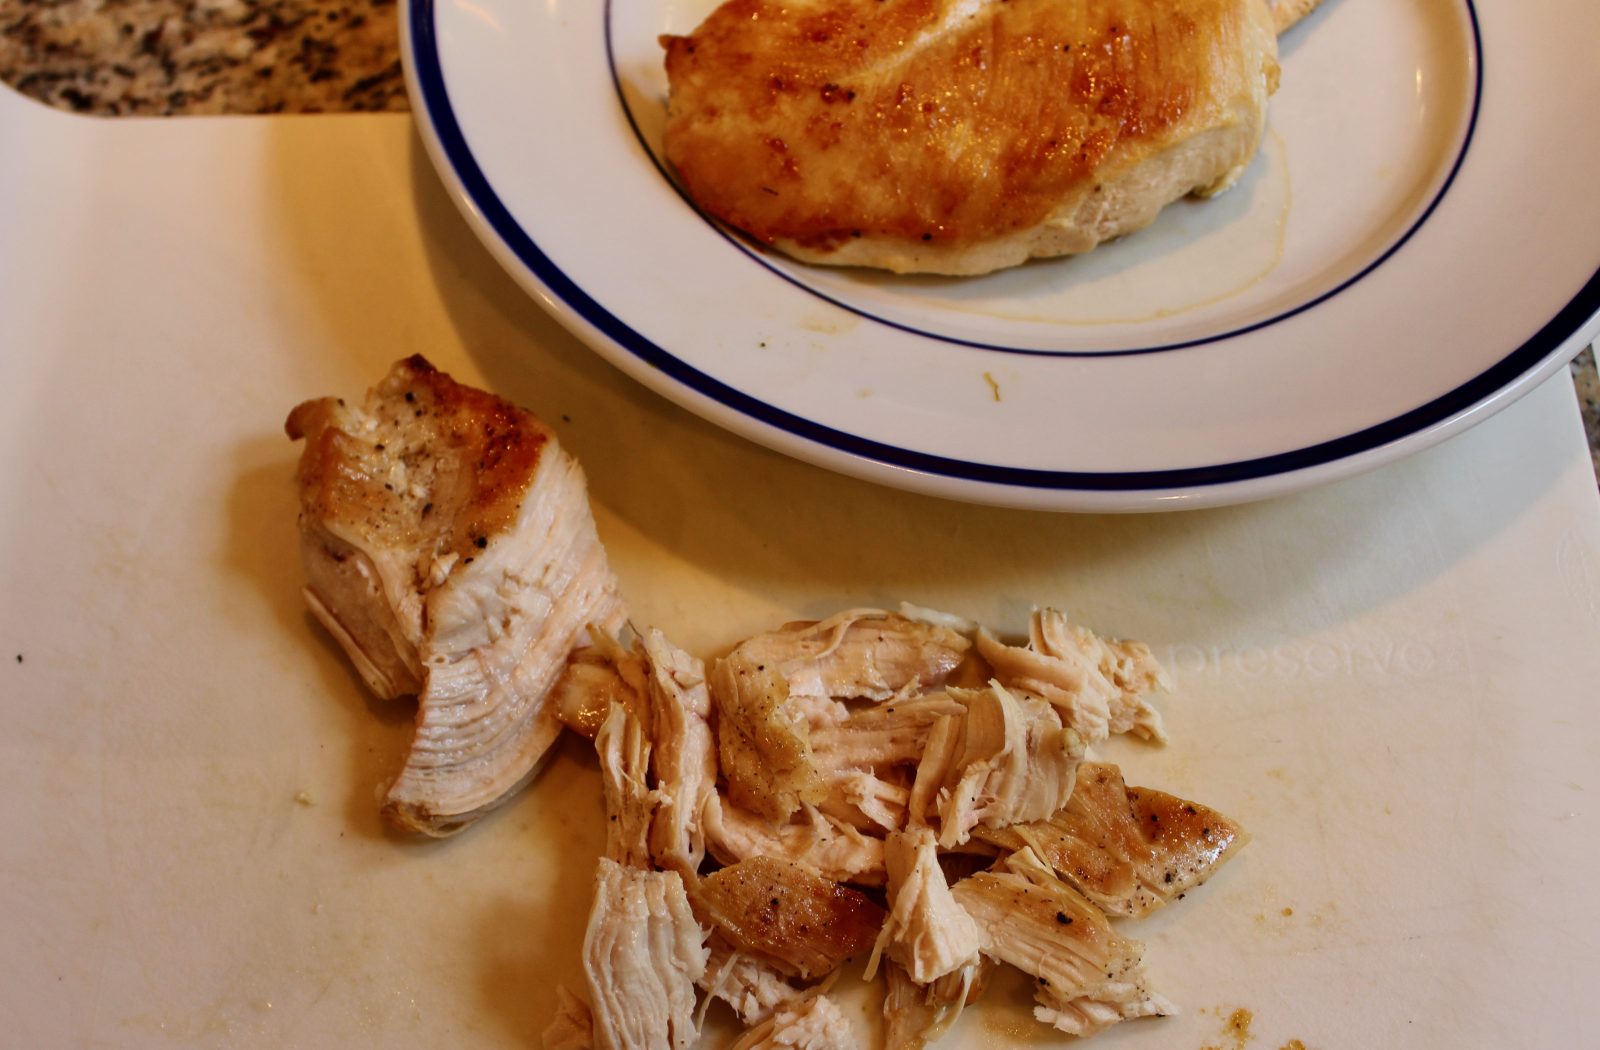 Recipe photo for White Chicken Chili showing shredded cooked chicken breast.  One breast is shredded on a white cutting board while the other breasts are whole on a white plate with a blue rim.
